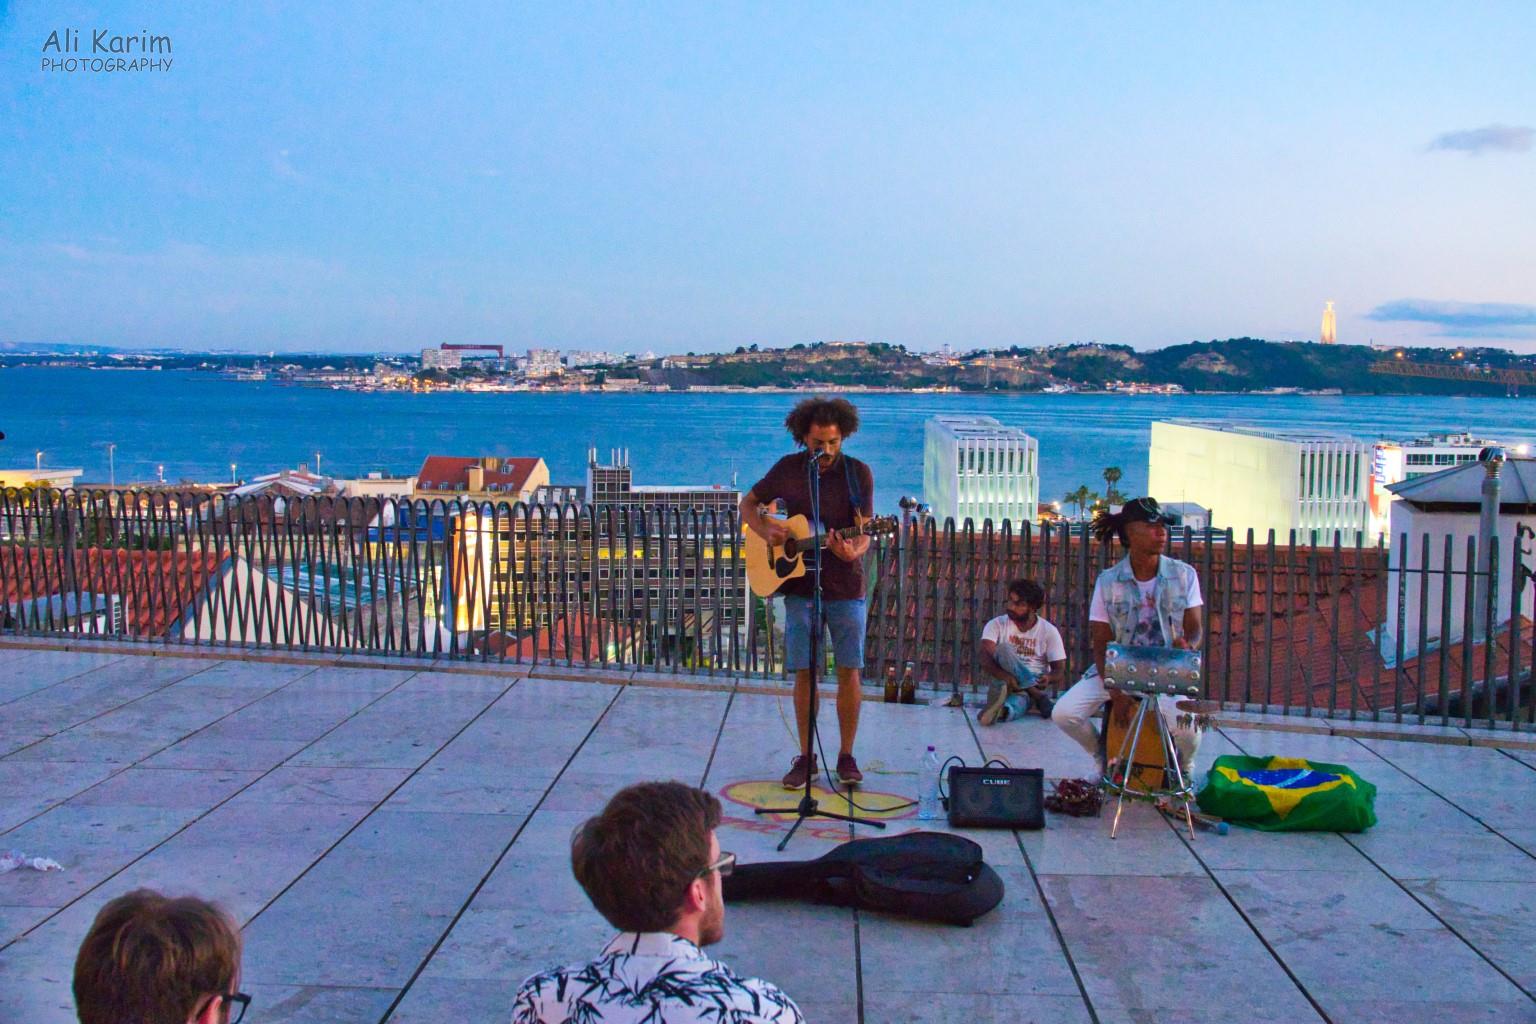 Lisbon Portugal: Entertainment at dusk at the Miradouro de Santa Catarina; one of multiple scenic viewpoints on the hills of Lisbon. You can see the Christo Rei statue in the background on the opposite riverbank, lit up for the evening.